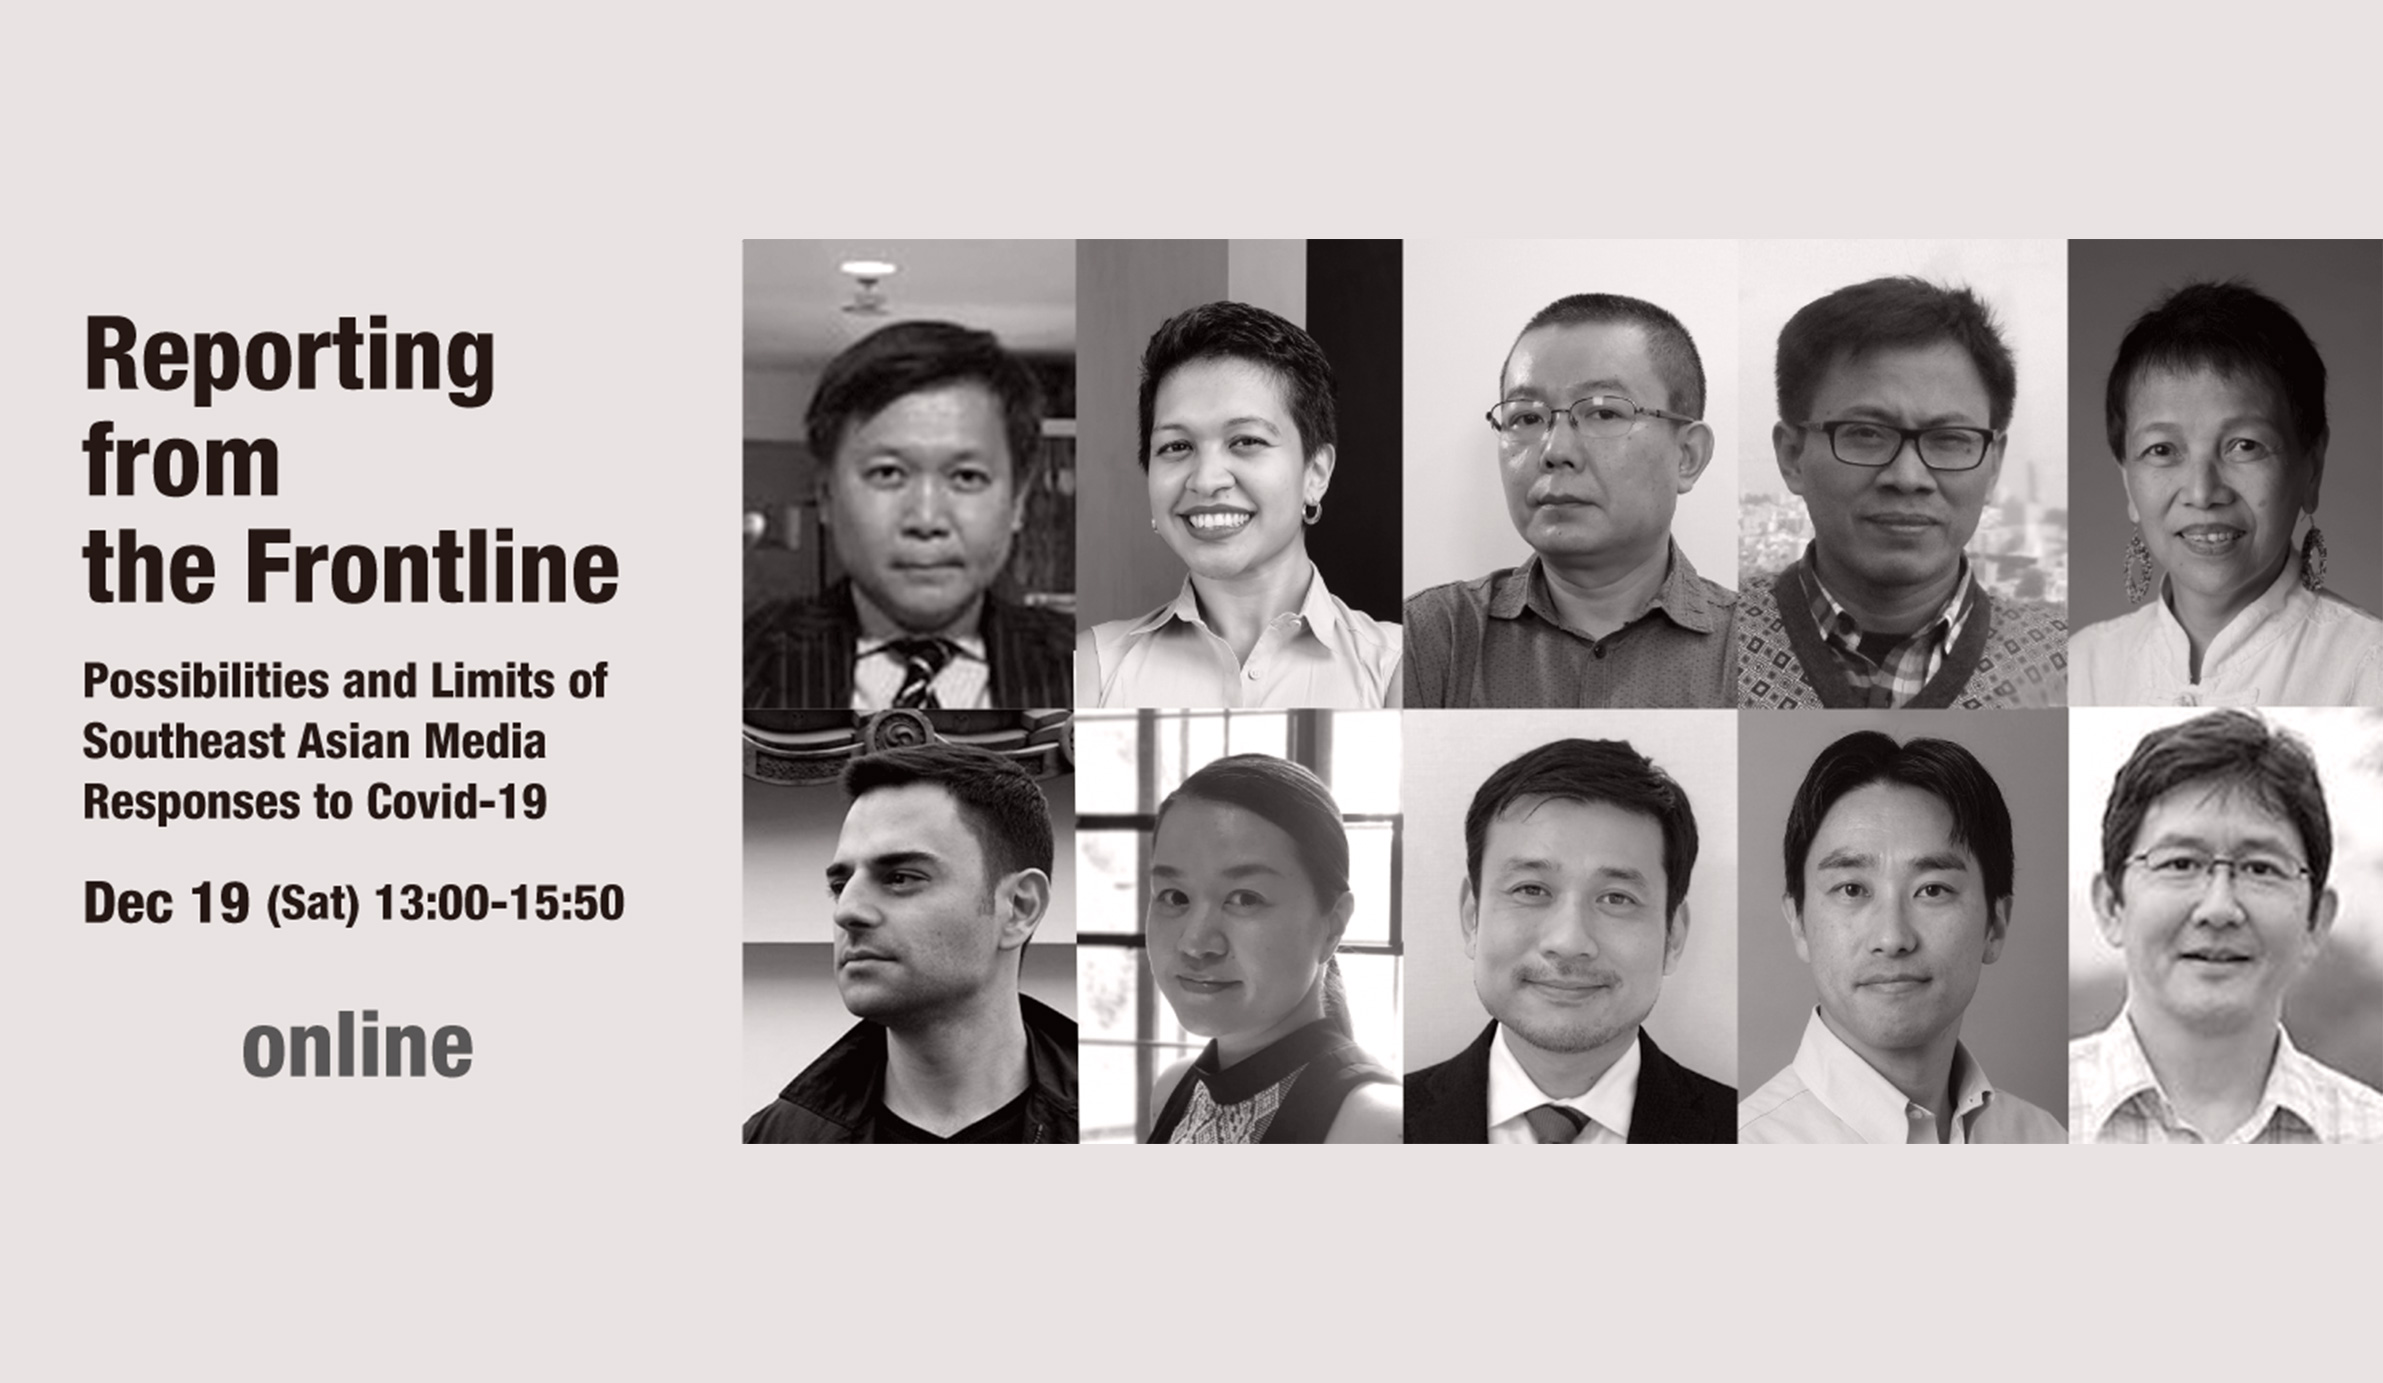 Reporting from the Frontline: Possibilities and Limits of Southeast Asian Media Responses to Covid-19